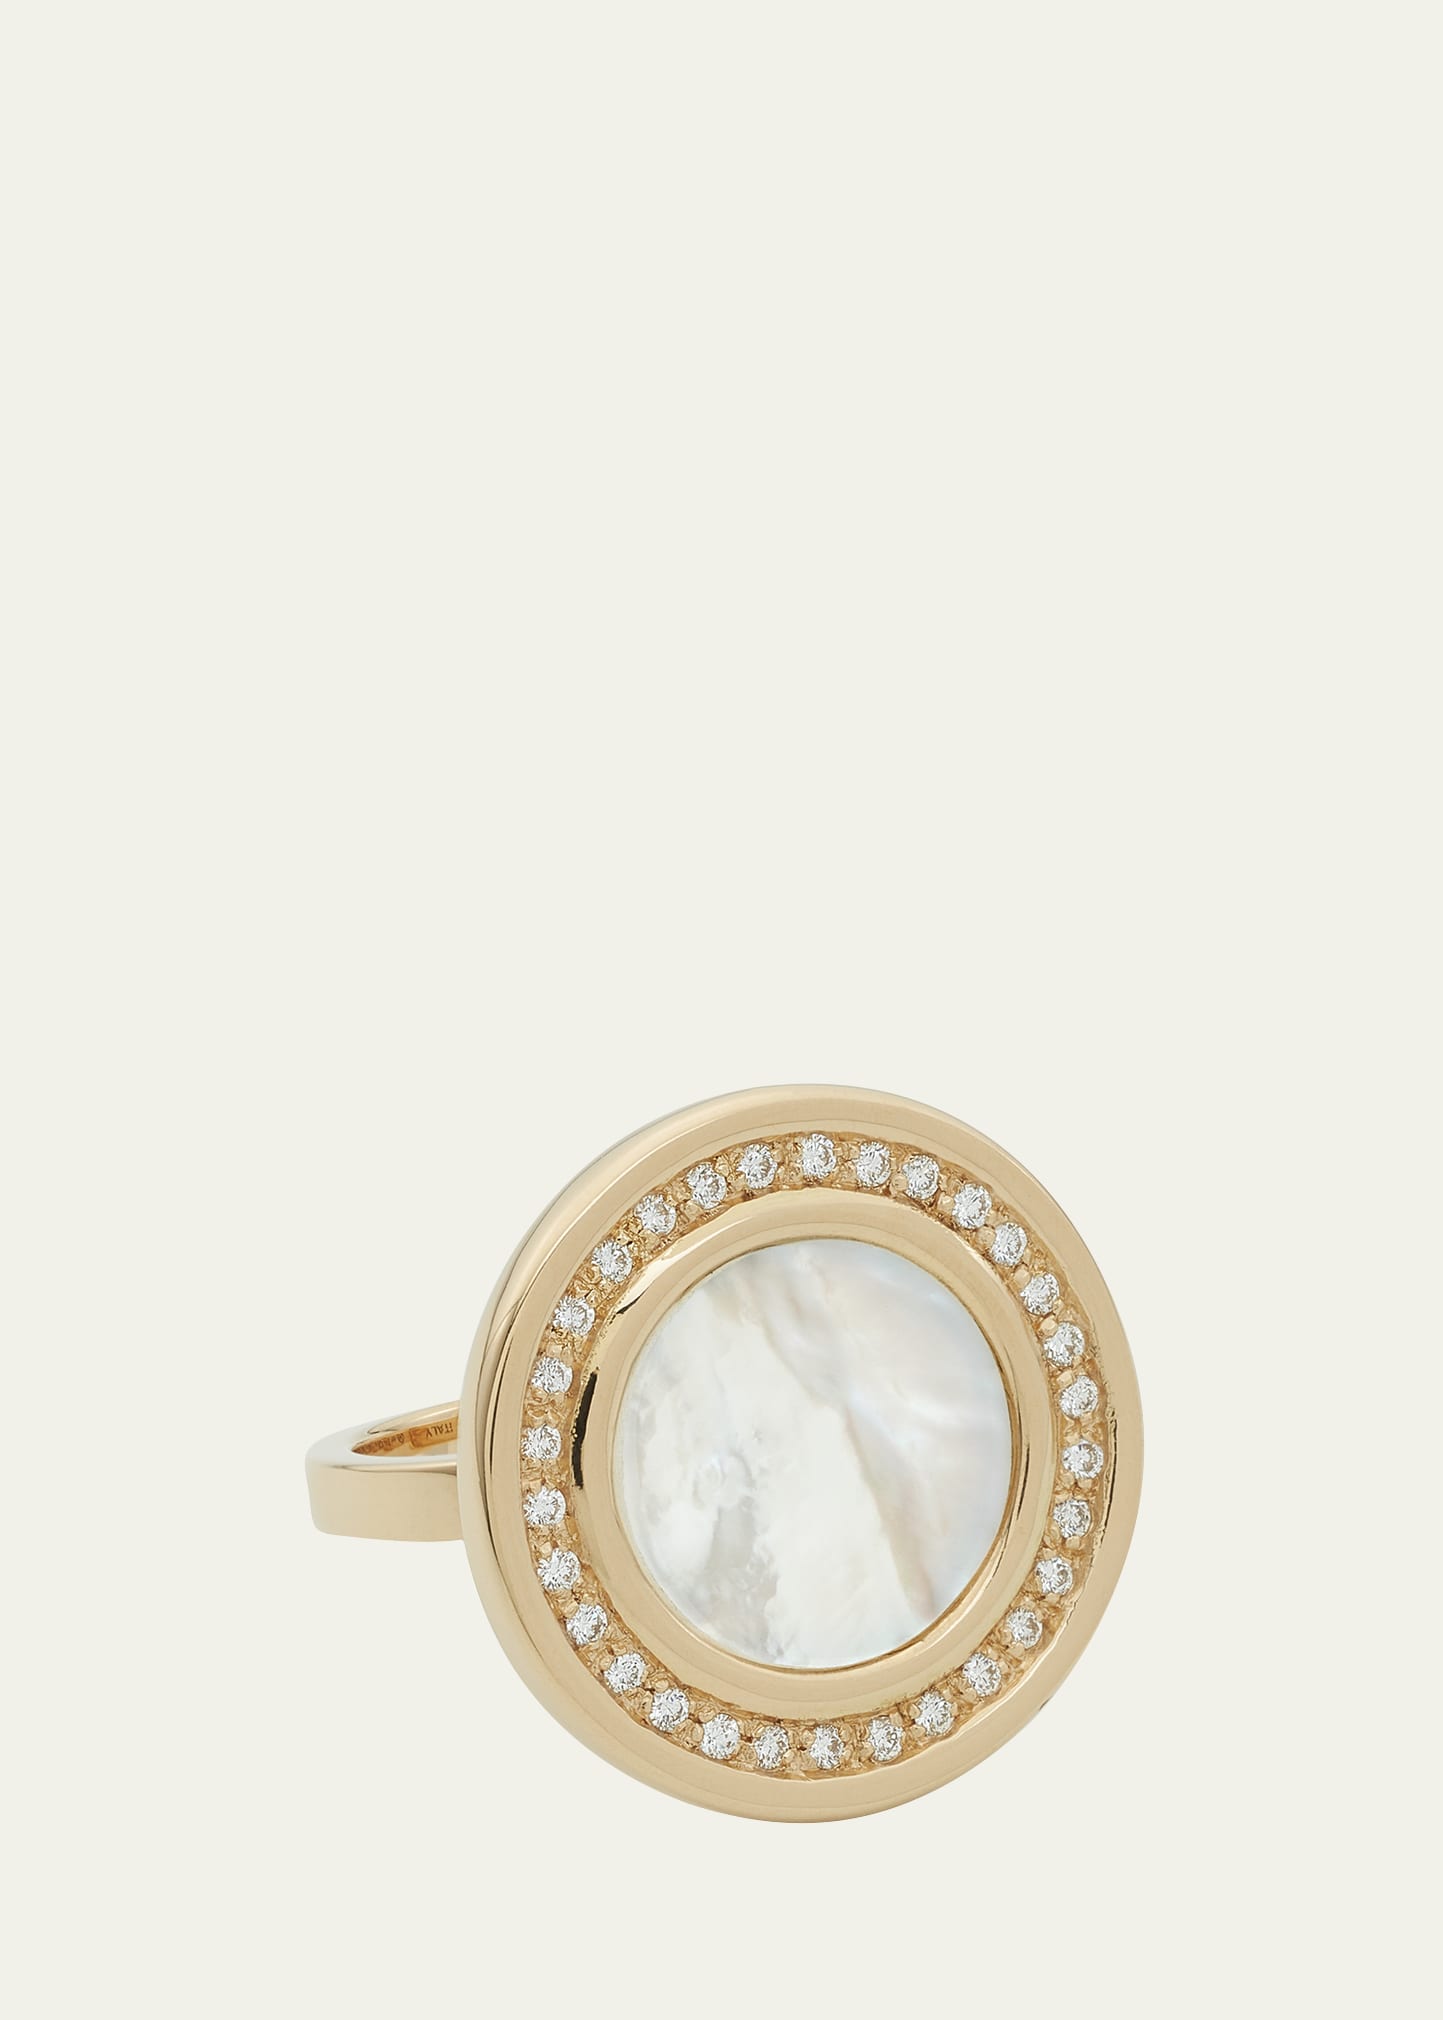 18K Gold Toscana Mother-of-Pearl and Diamond Ring